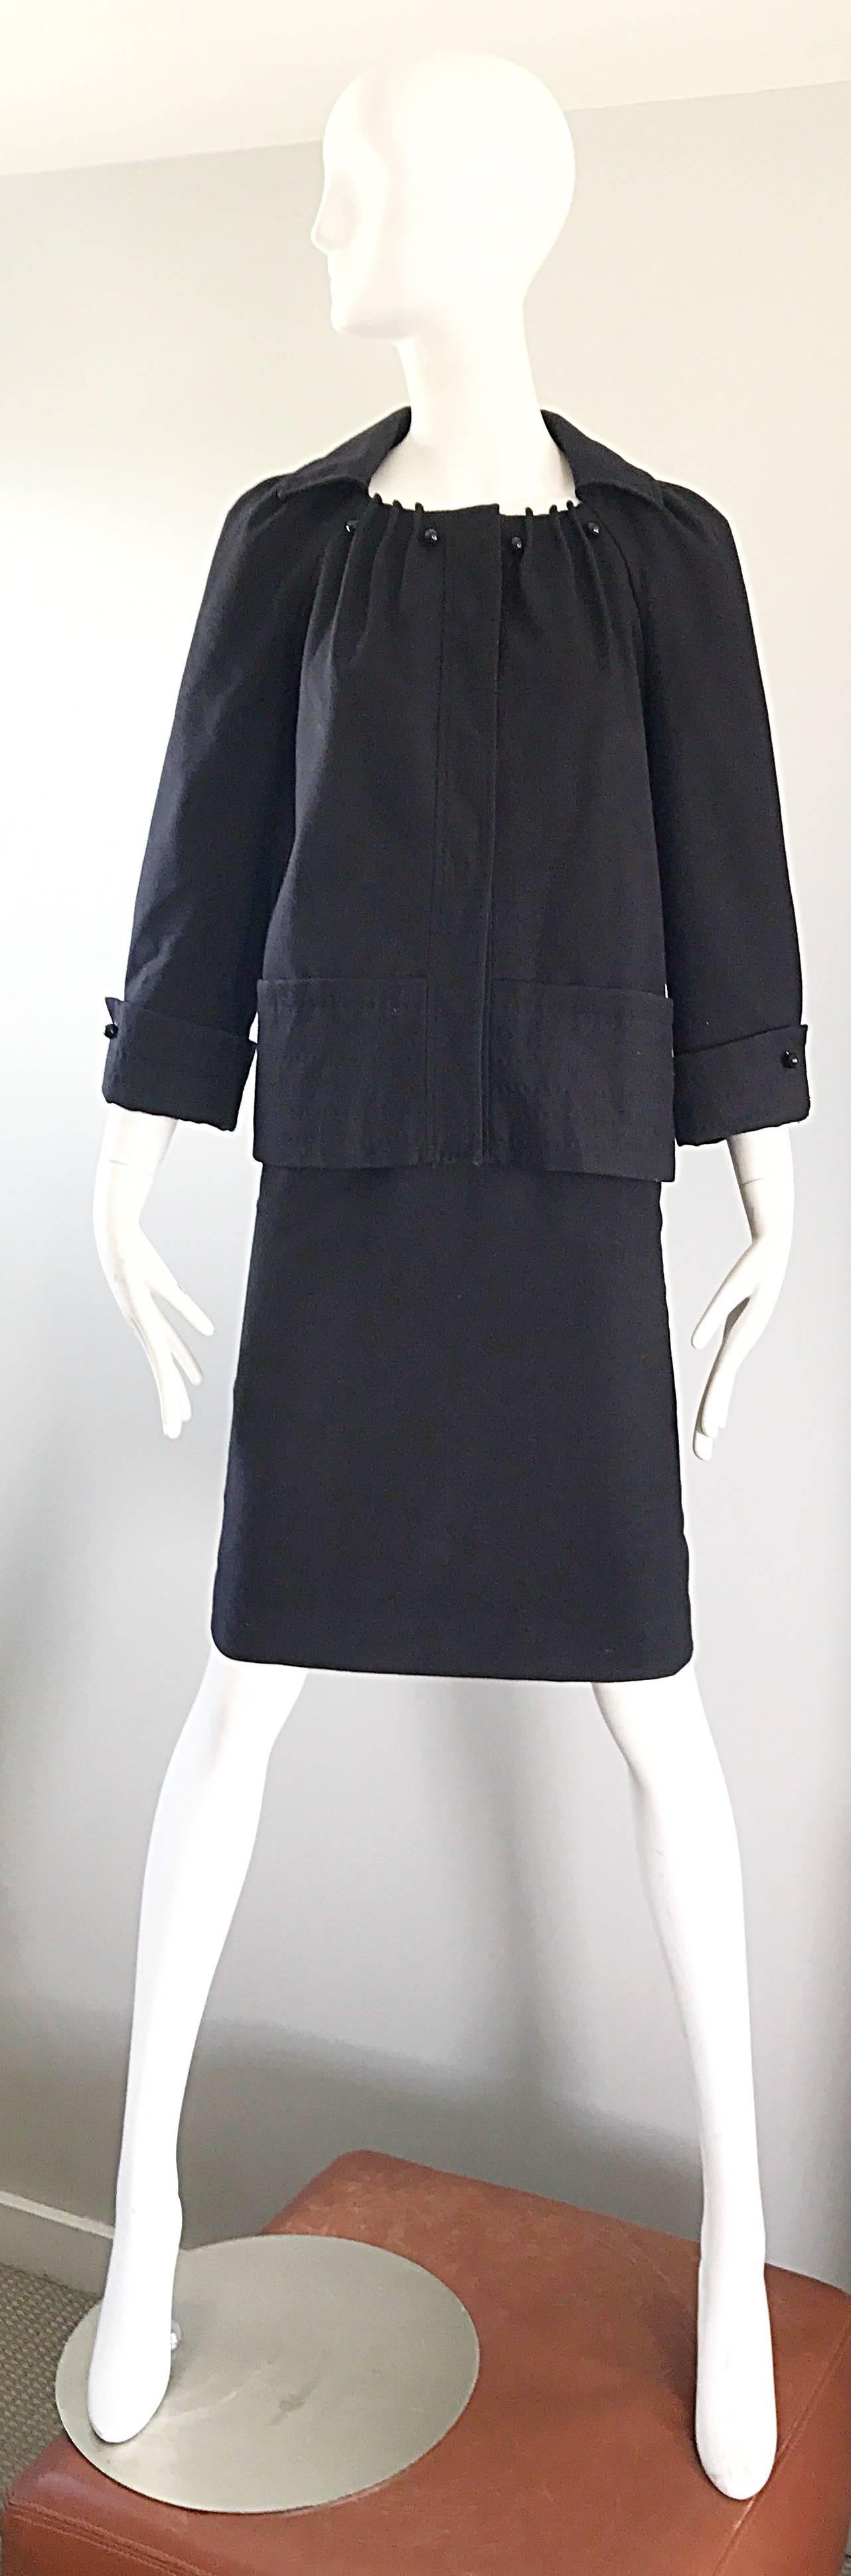 Classic and chic 90s does 60s ALBERTA FERRETTI black virgin wool skirt suit! Jacket features a pillbox / swing silhouette. Pleated details around the collar, with round black lacquer buttons. Large hidden snaps up the front. Pocket at each side of